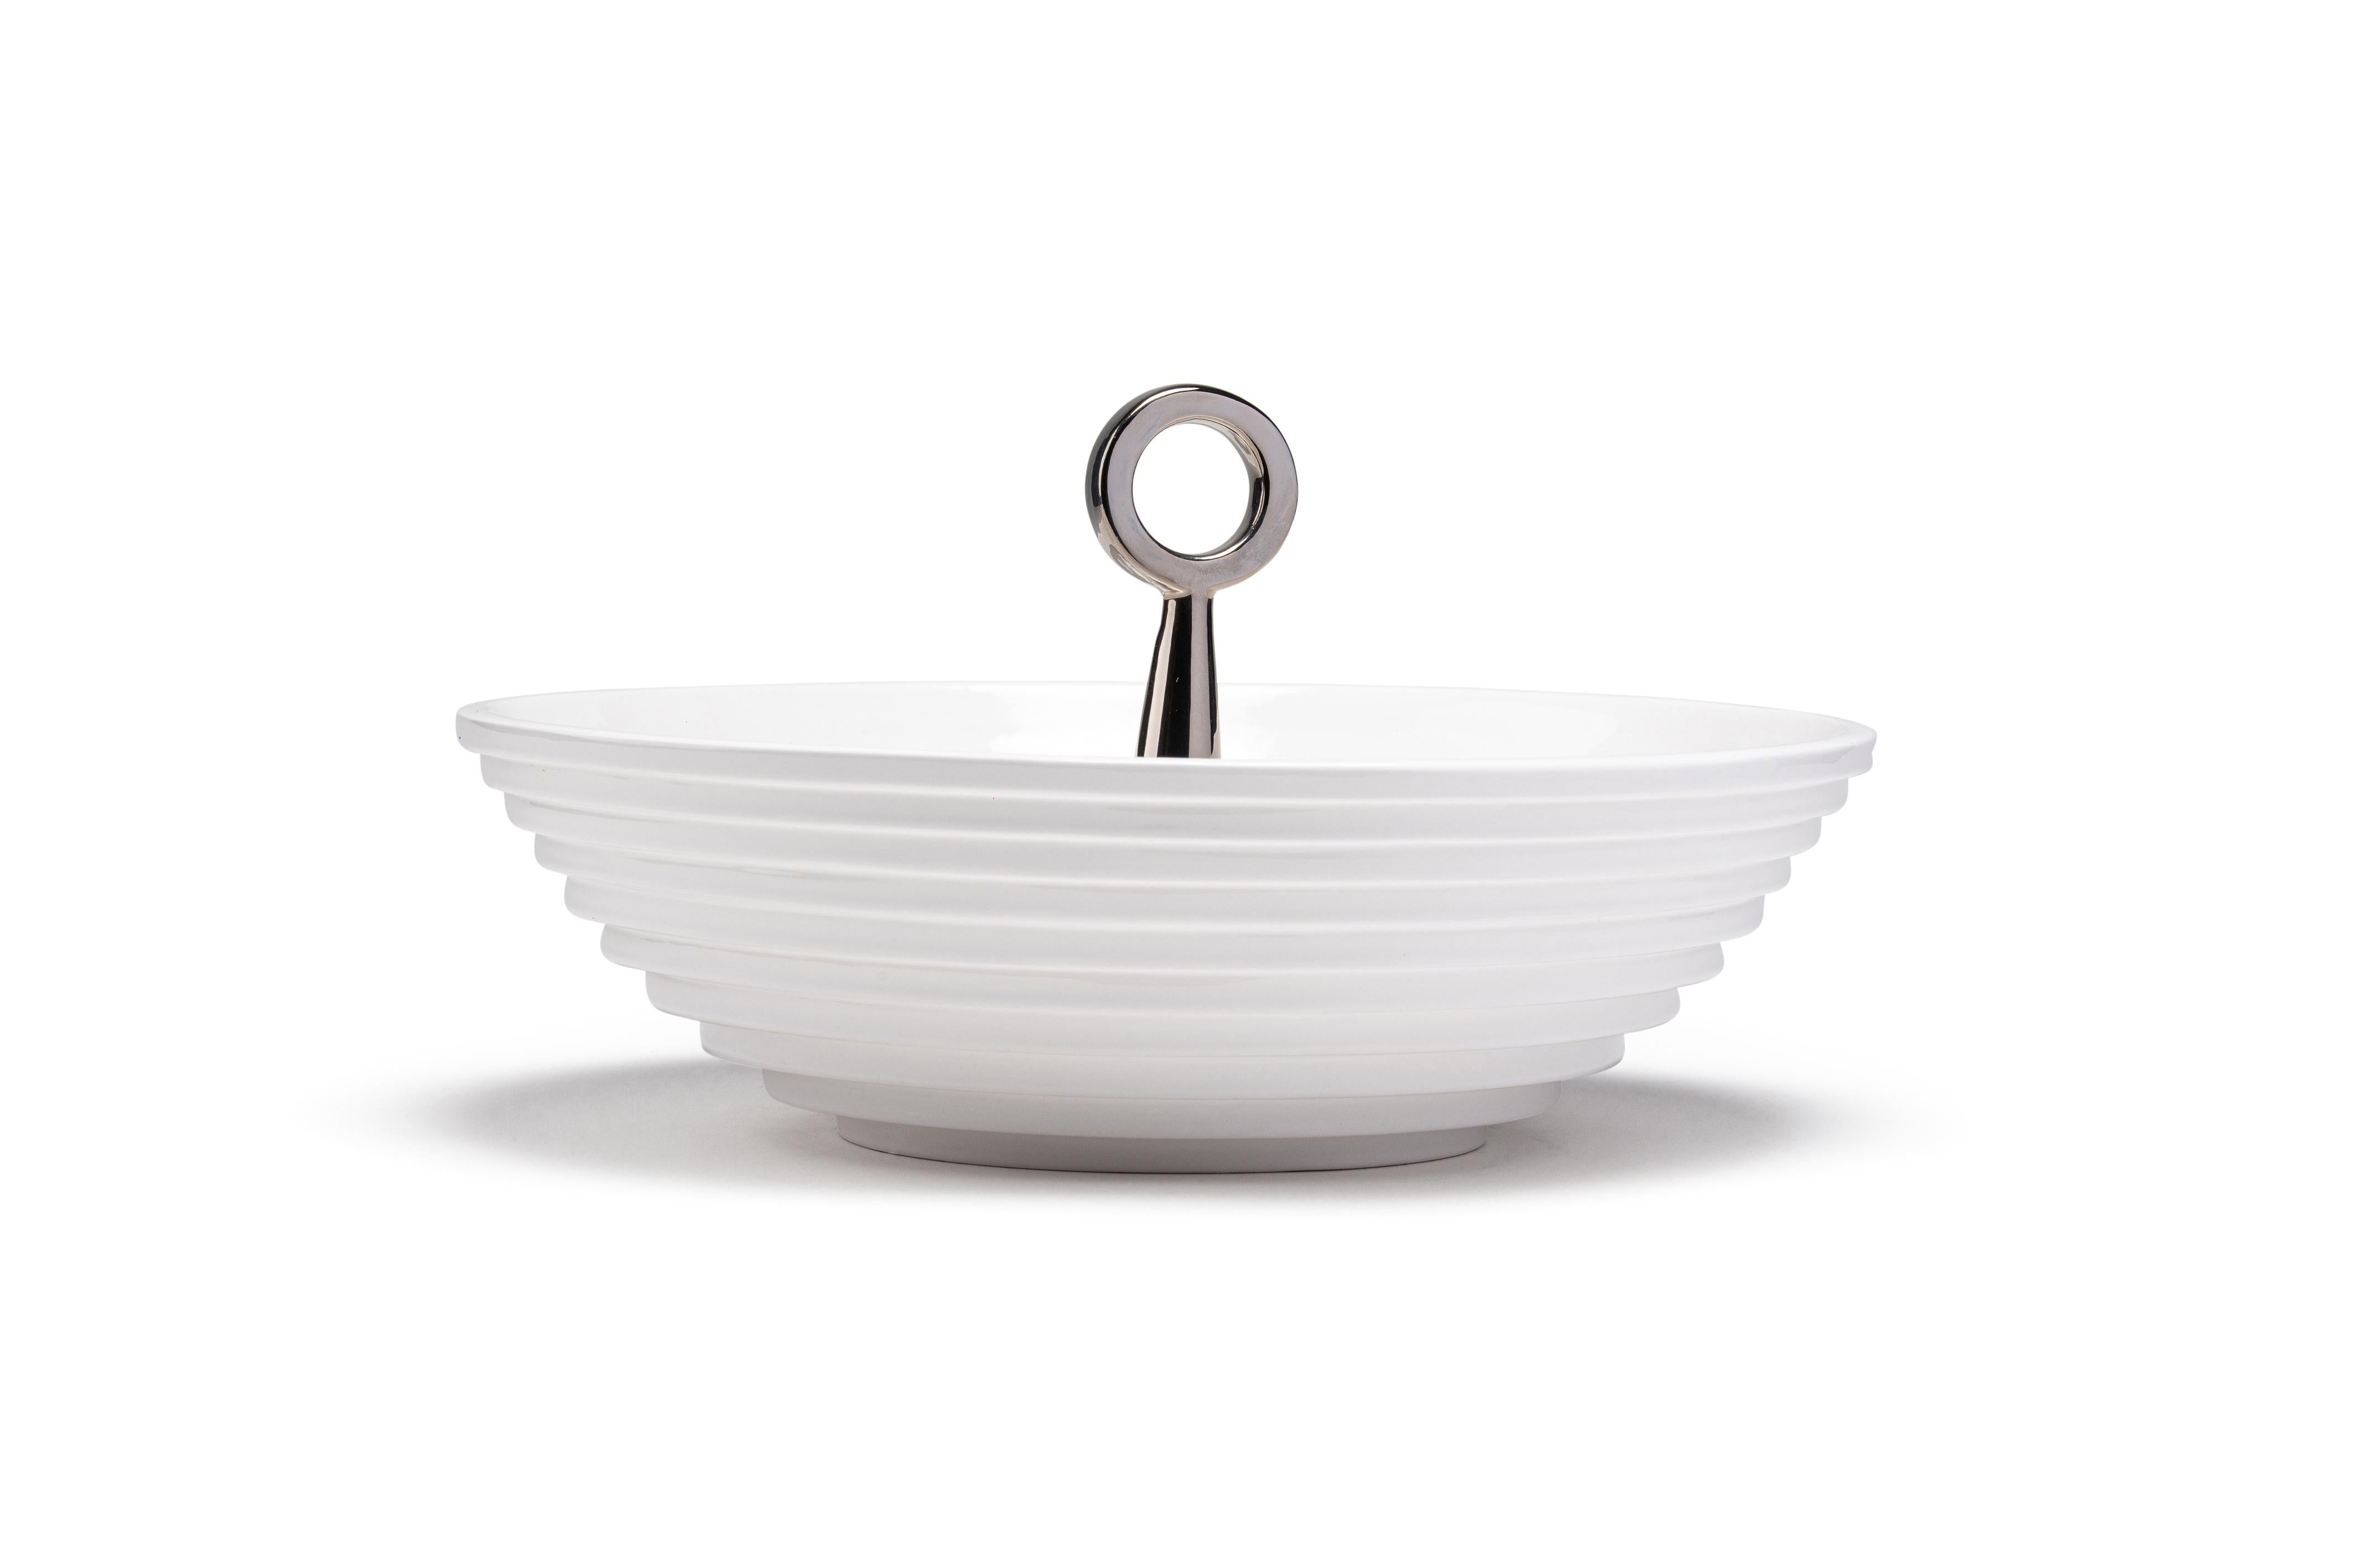 The 12:30 from the 'Meridiane' collection is a white painted ceramic bowl with platinum painted details. It is an accessory that can give personality to a minimalist environment and at the same time it can find its perfect location in a more classic